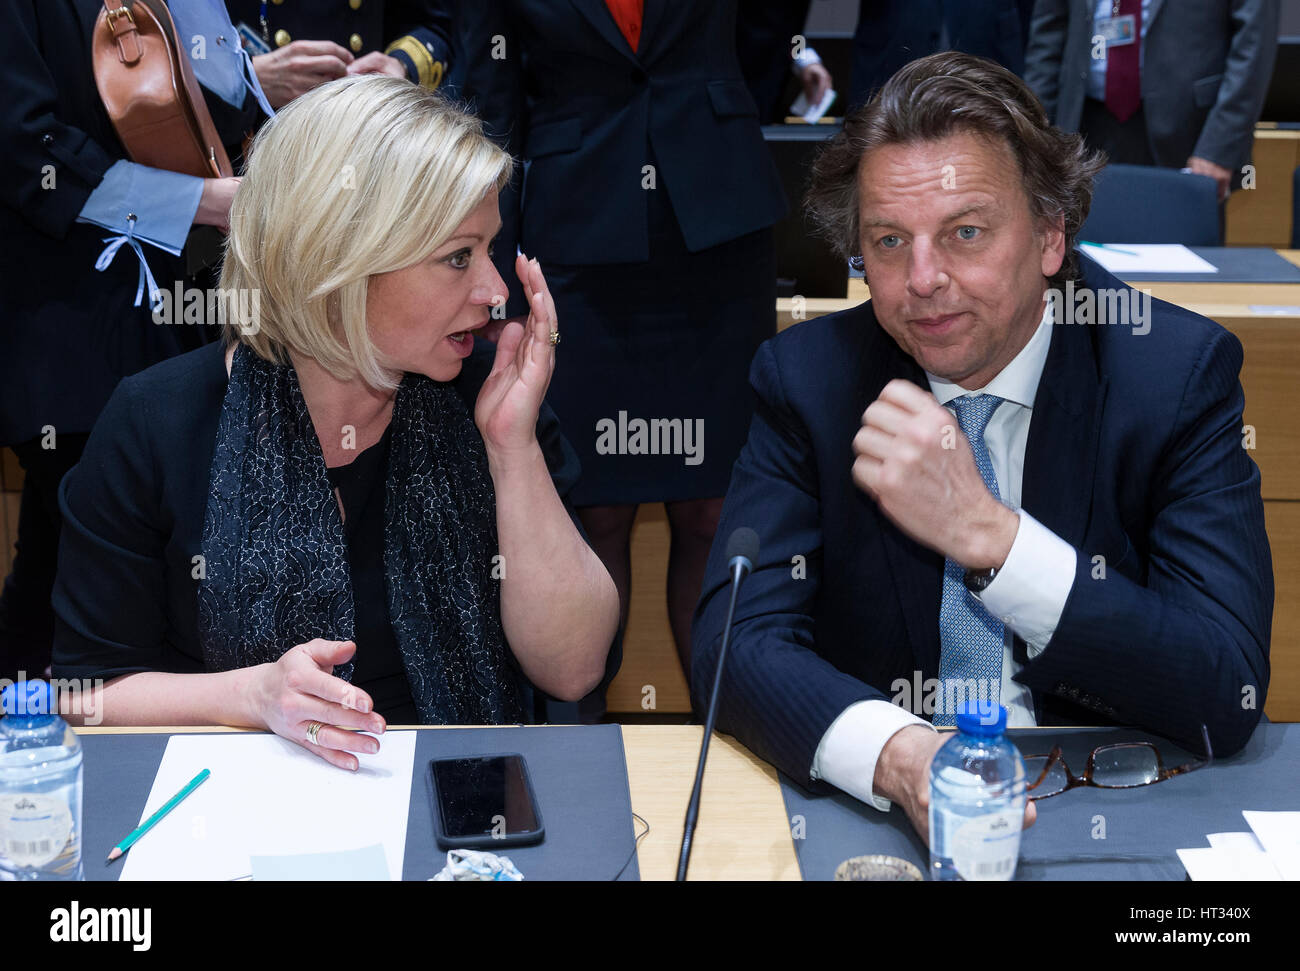 March 6, 2017 - Brussels, Belgium: Netherland Minister for defense Jeanine Hennis-Plasschaert (L) is talking with the Dutch Minister of Foreign affairs Bert Koenders (R) during an EU Defense and foreign affairs Ministers meeting in the Europa building, the EU Council headquarter. - NO WIRE SERVICE- Photo: Thierry Monasse/dpa Photo: Thierry Monasse/dpa Stock Photo